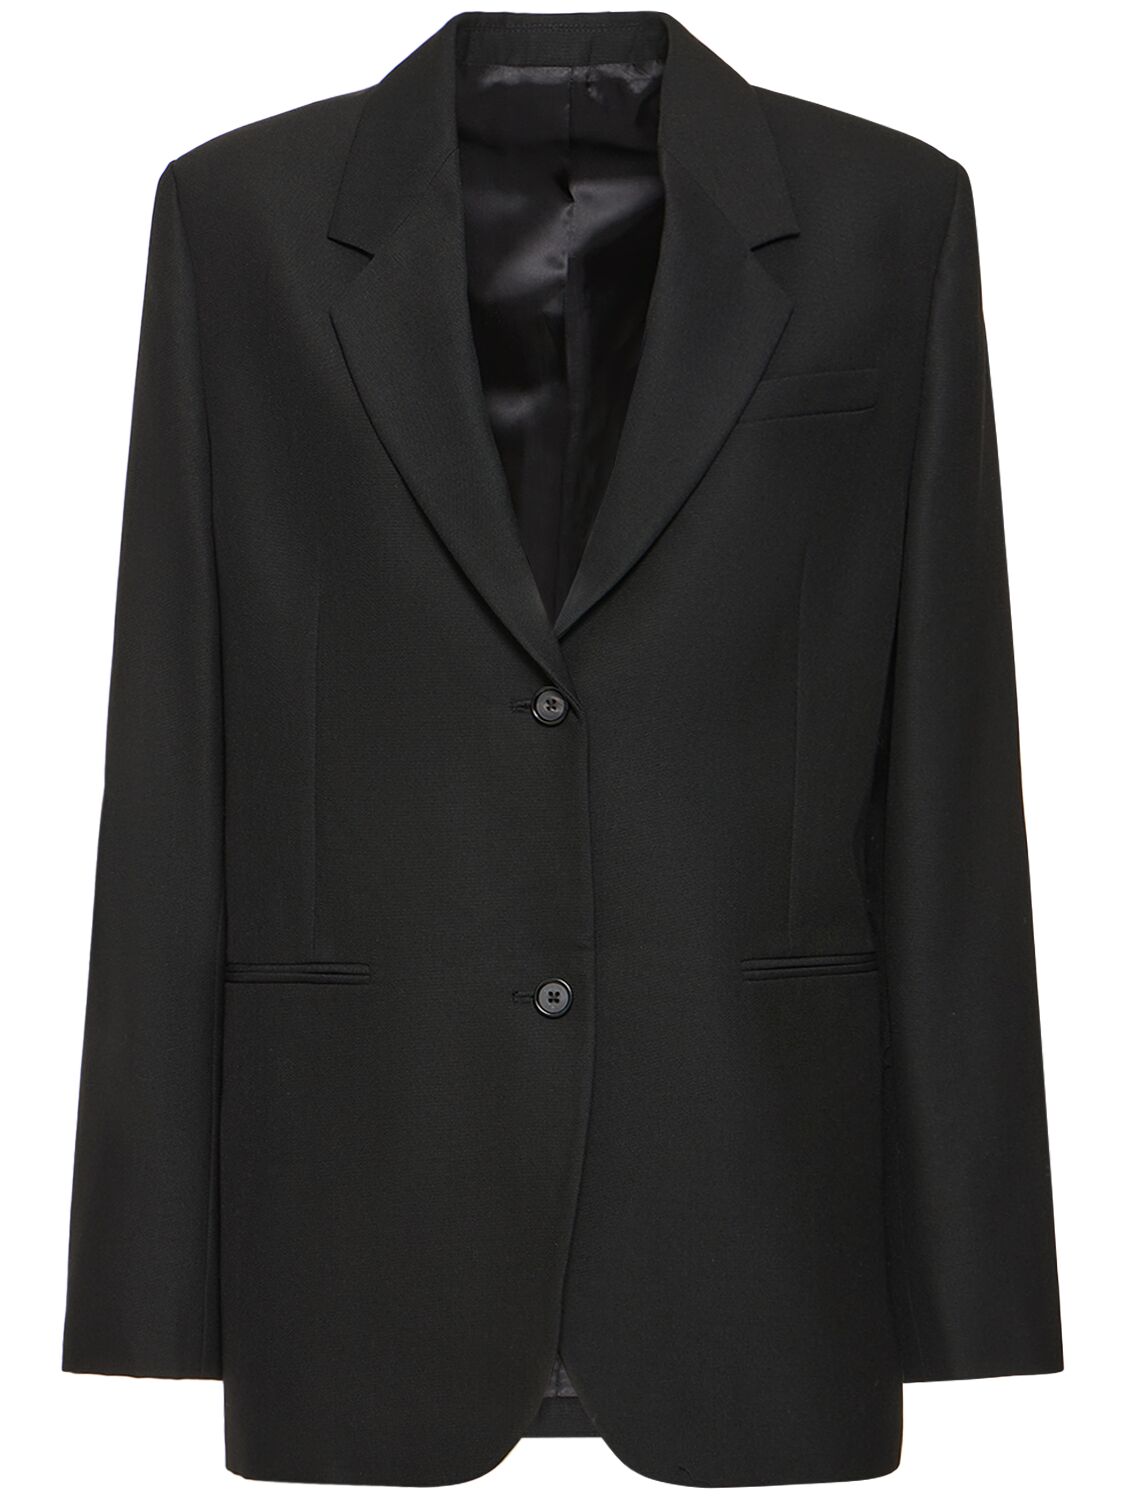 Image of Tailored Suit Wool Blend Jacket